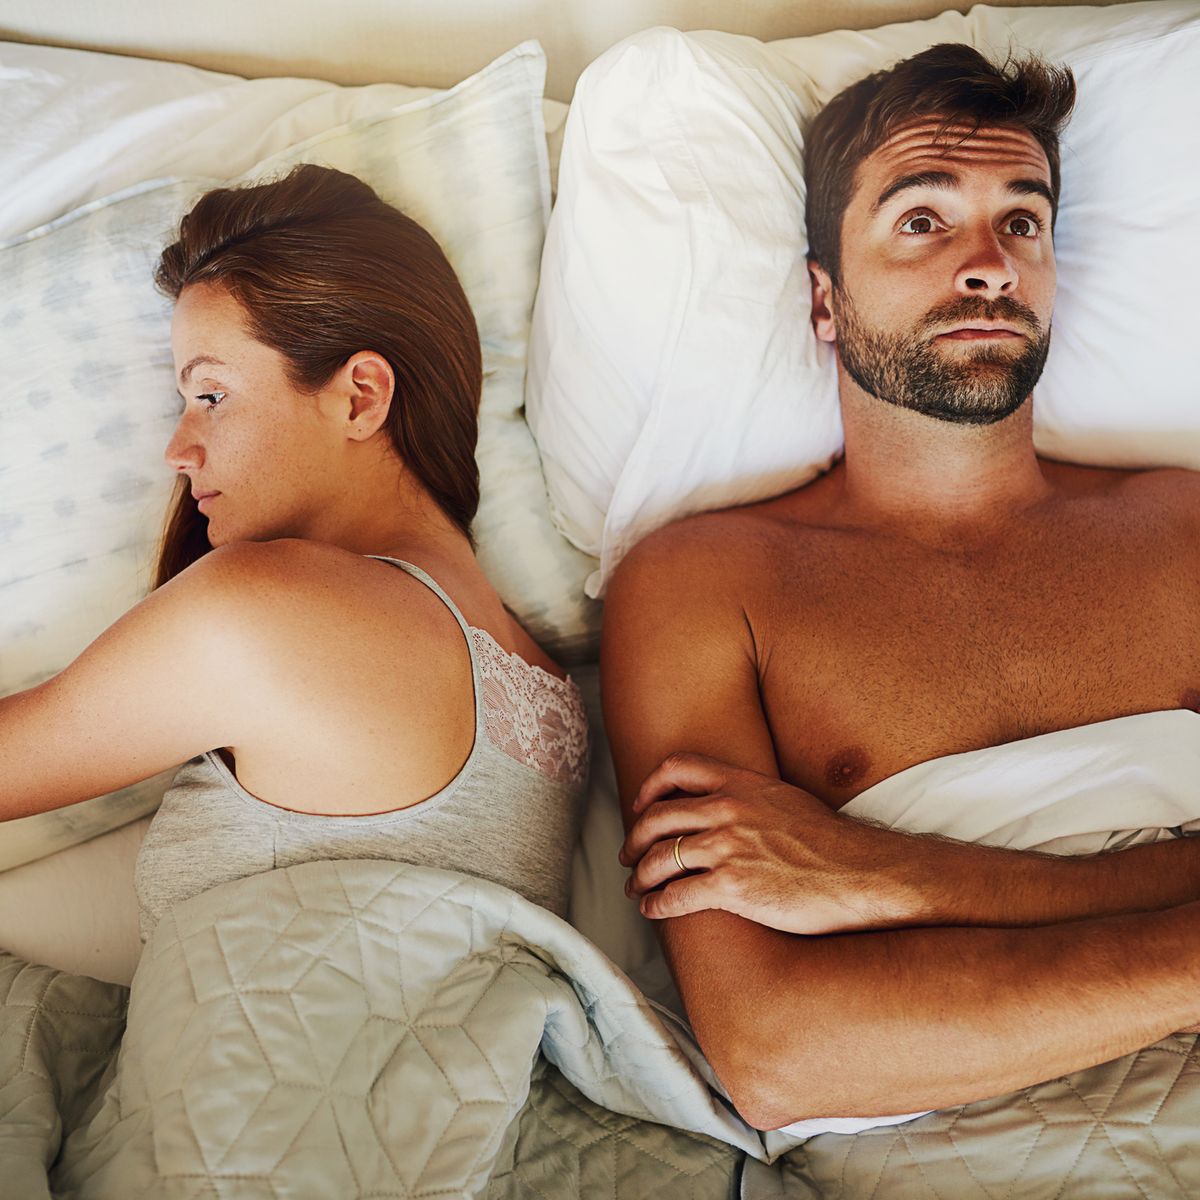 Why Do Guys Get Sleepy After Sex?